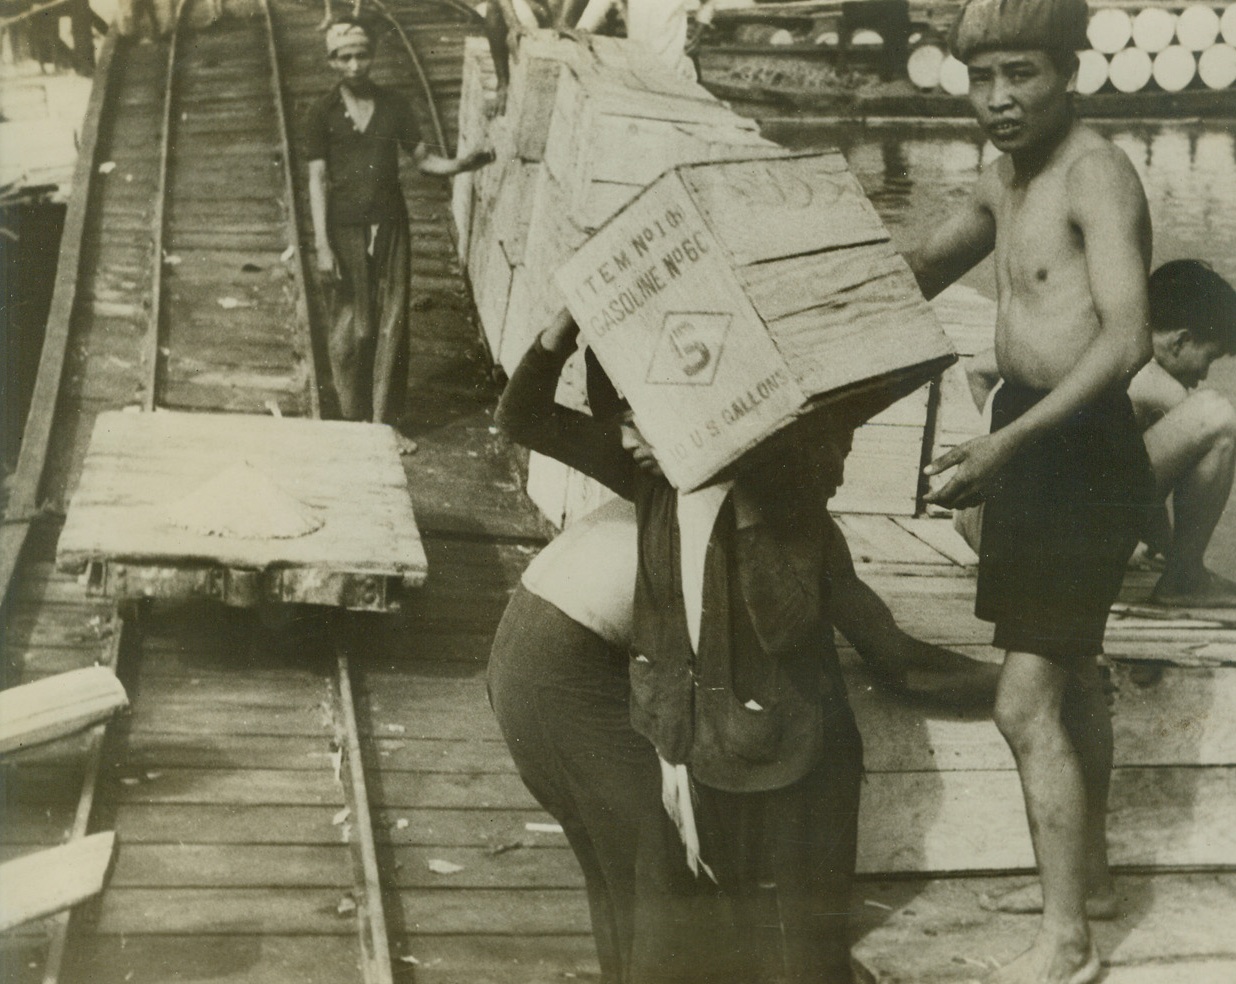 U.S. Gasoline for Lamps of Indo China, 10/27/1940  Haiphong, Indo China – Natives carry 10-gallon crates of American gasoline from the docks of Haiphong into shore. The gasoline, which belongs to Standard Oil, is part of huge U.S. holdings in Indo China now endangered by the Japan-Vichey Pact. Credit: ACME;